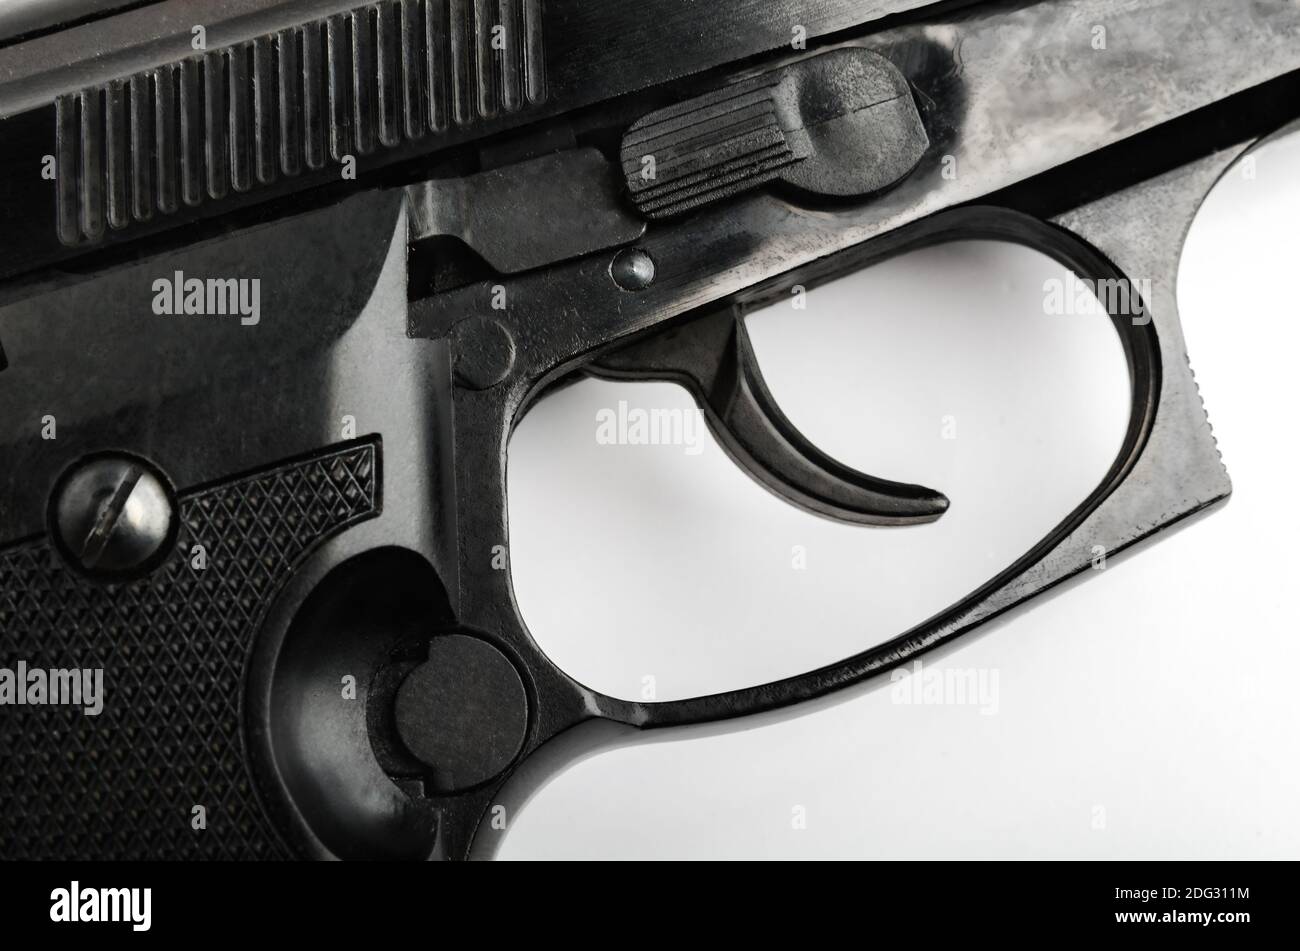 Shiny Gun High Resolution Stock Photography and Images - Alamy